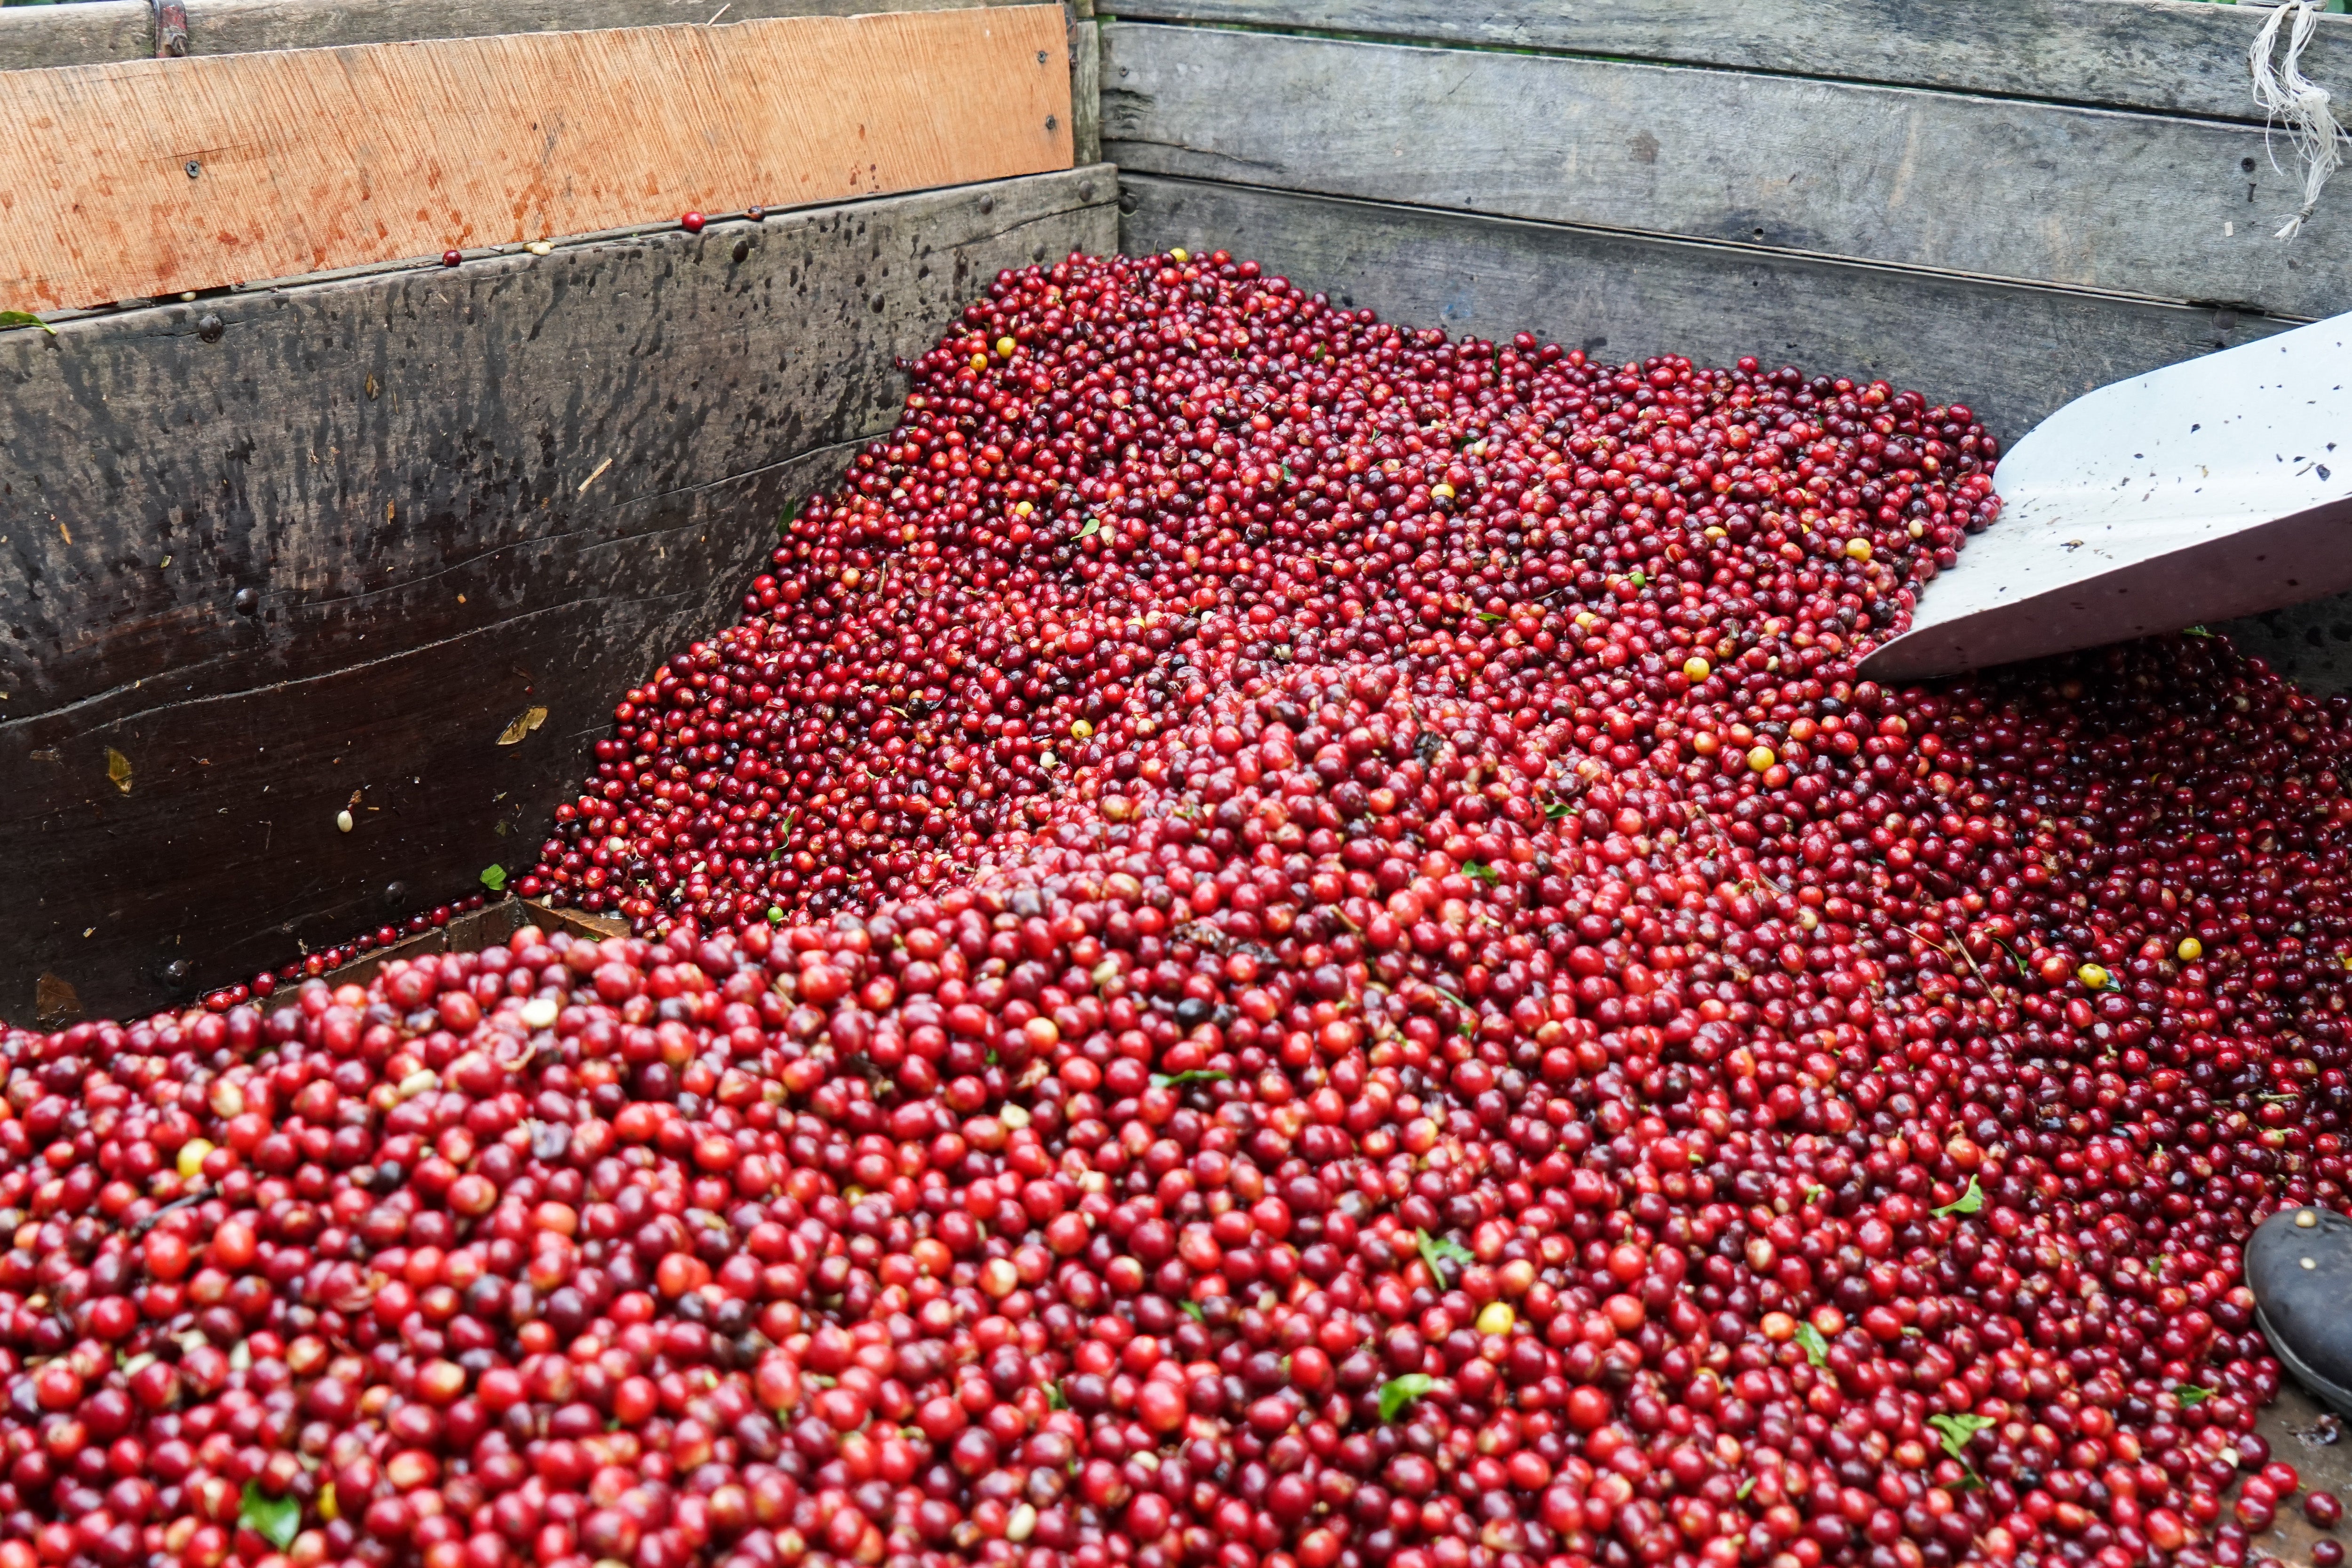 An Overview of Coffee Processing Methods